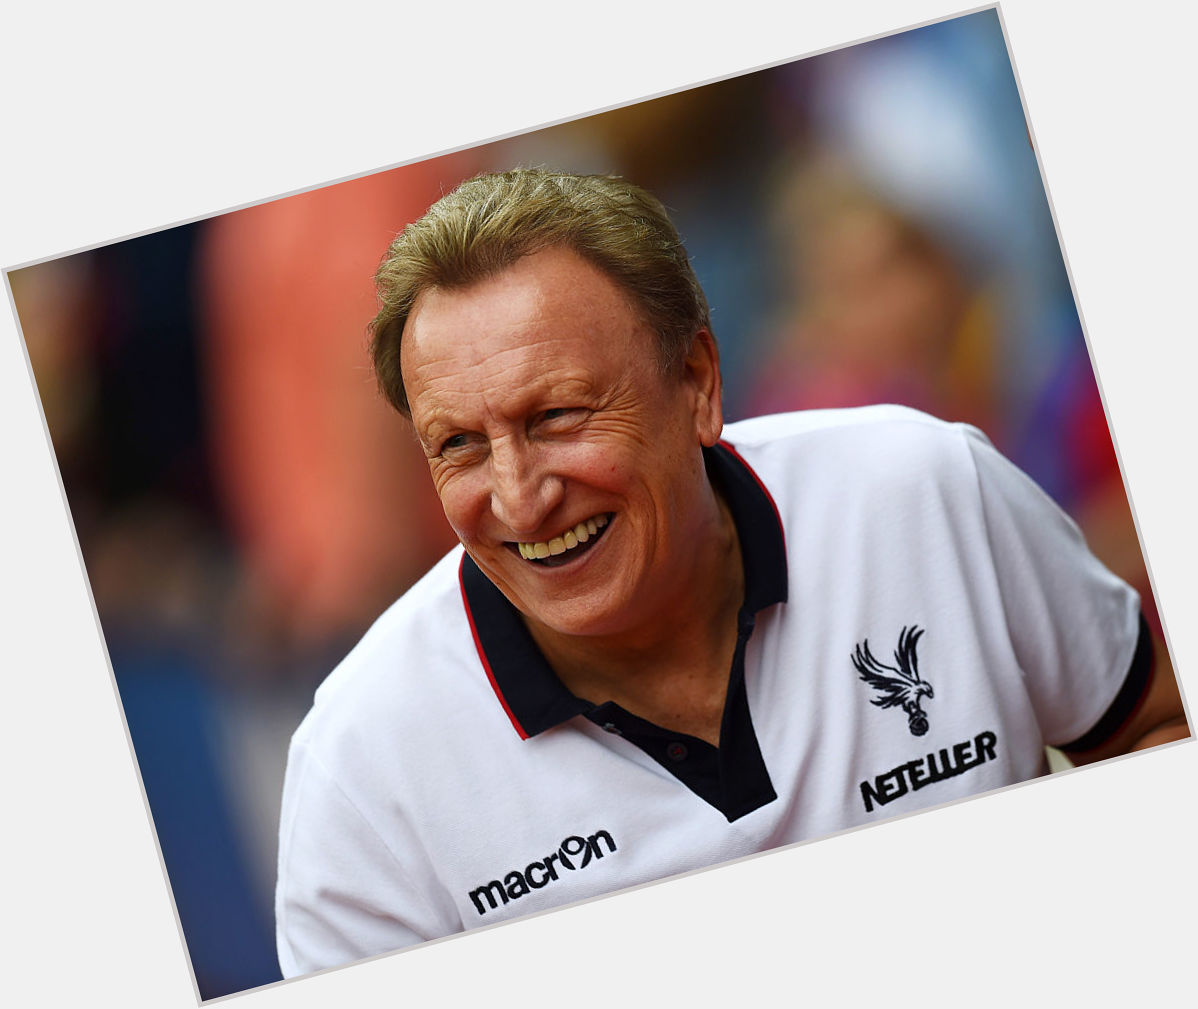 Happy birthday to former Crystal Palace manager Neil Warnock, who is 7  4  today  